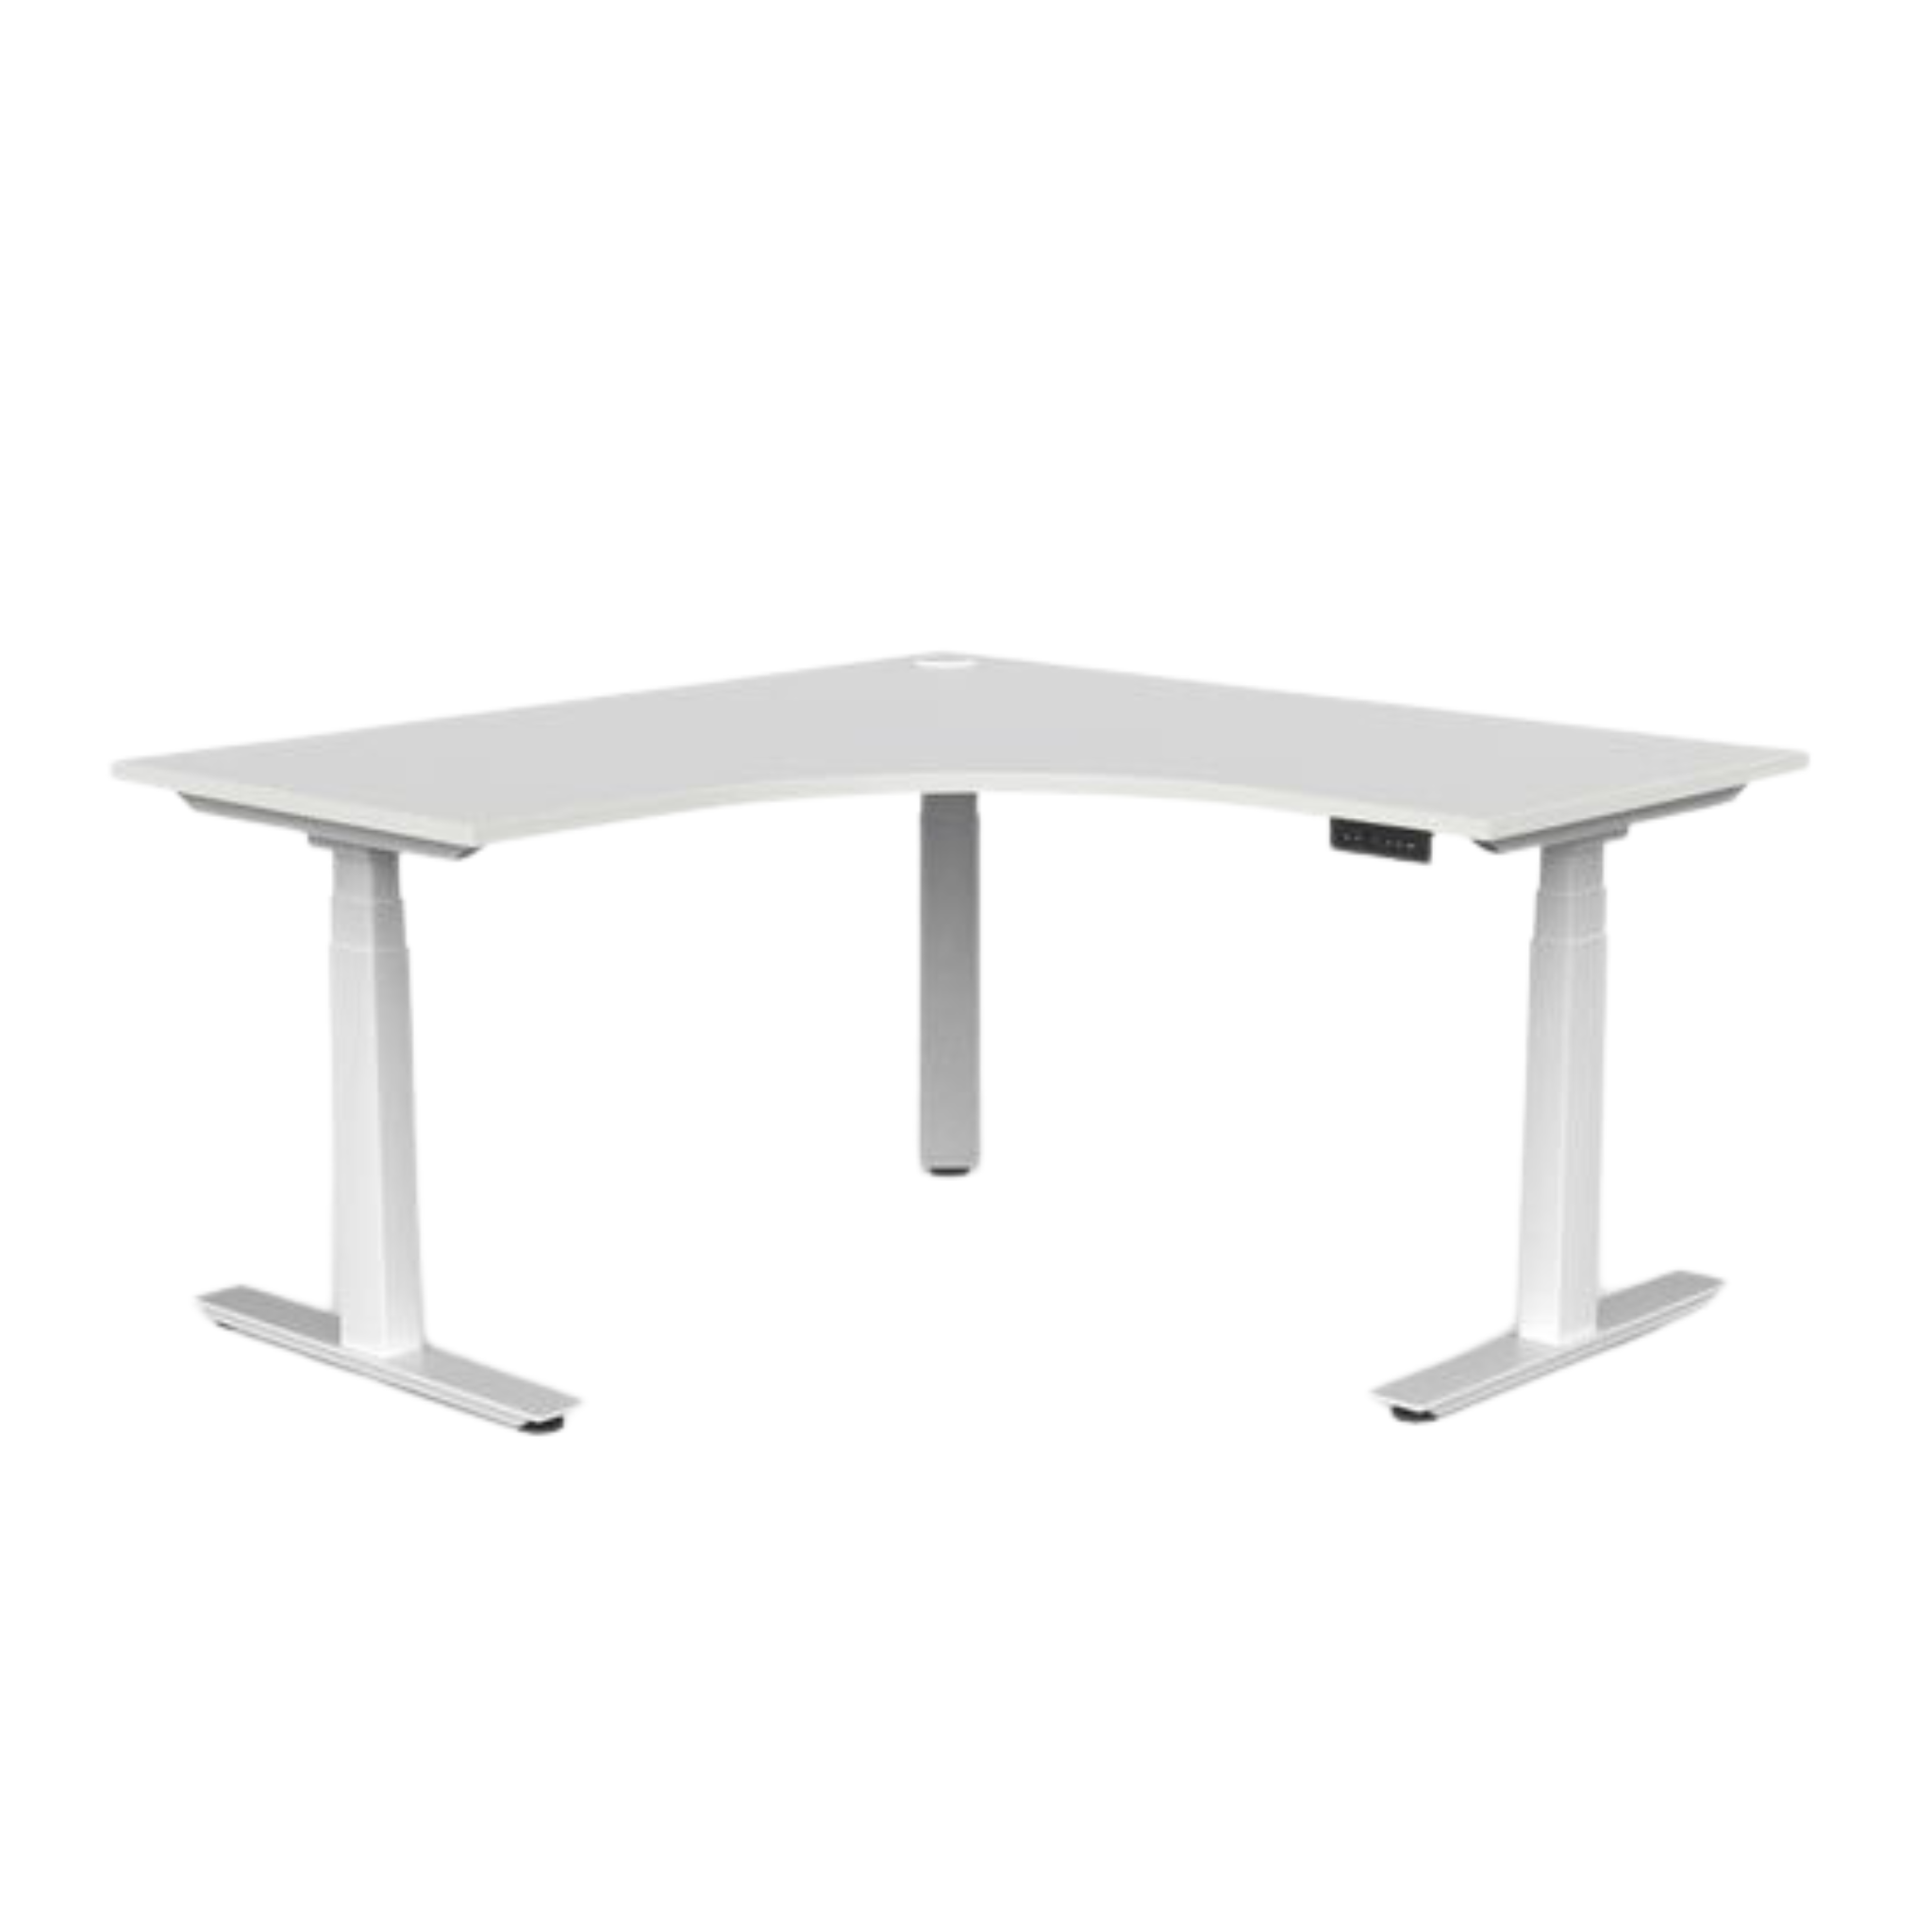 Agile 3 electric sit to stand corner workstation with white frame and white top